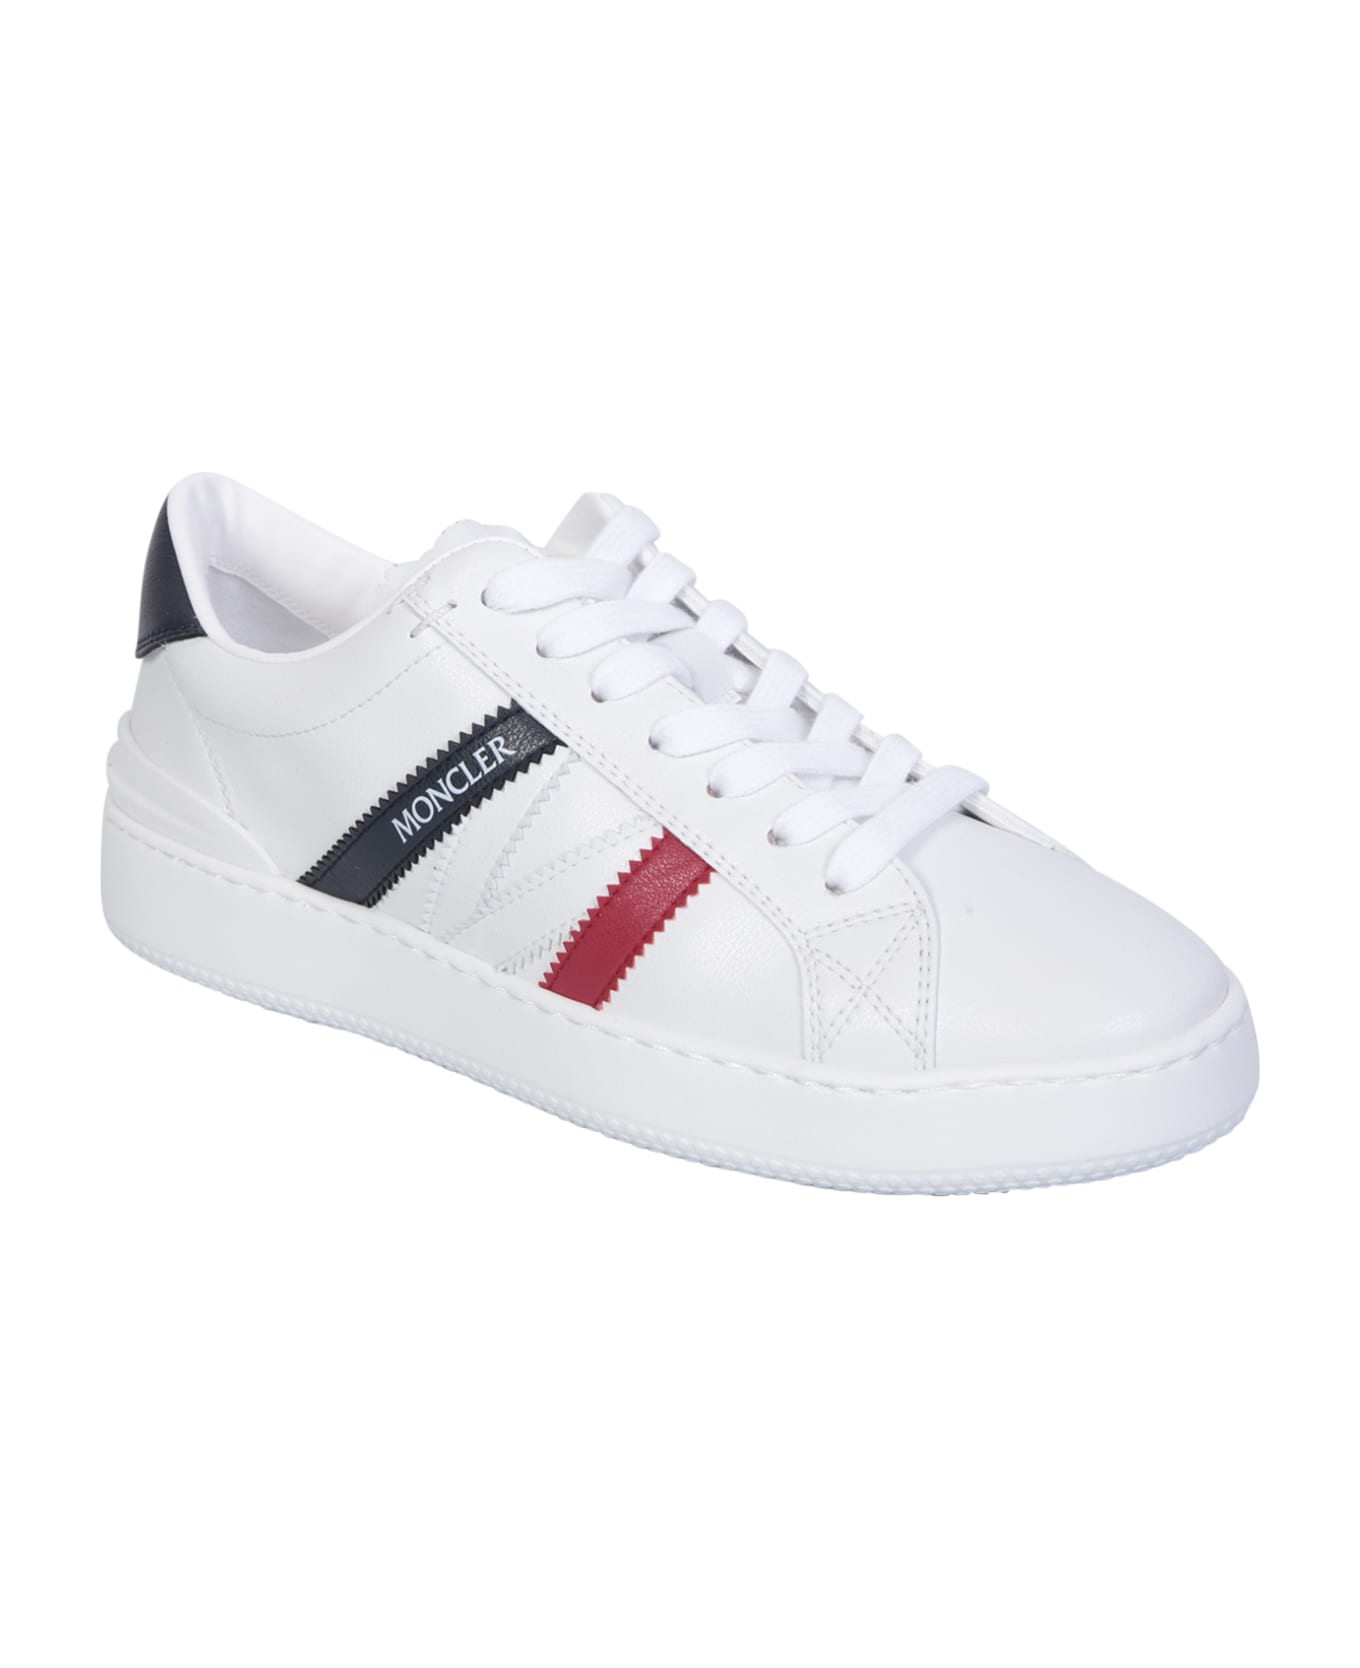 Moncler Monaco M Sneakers In White, Blue And Red - White スニーカー